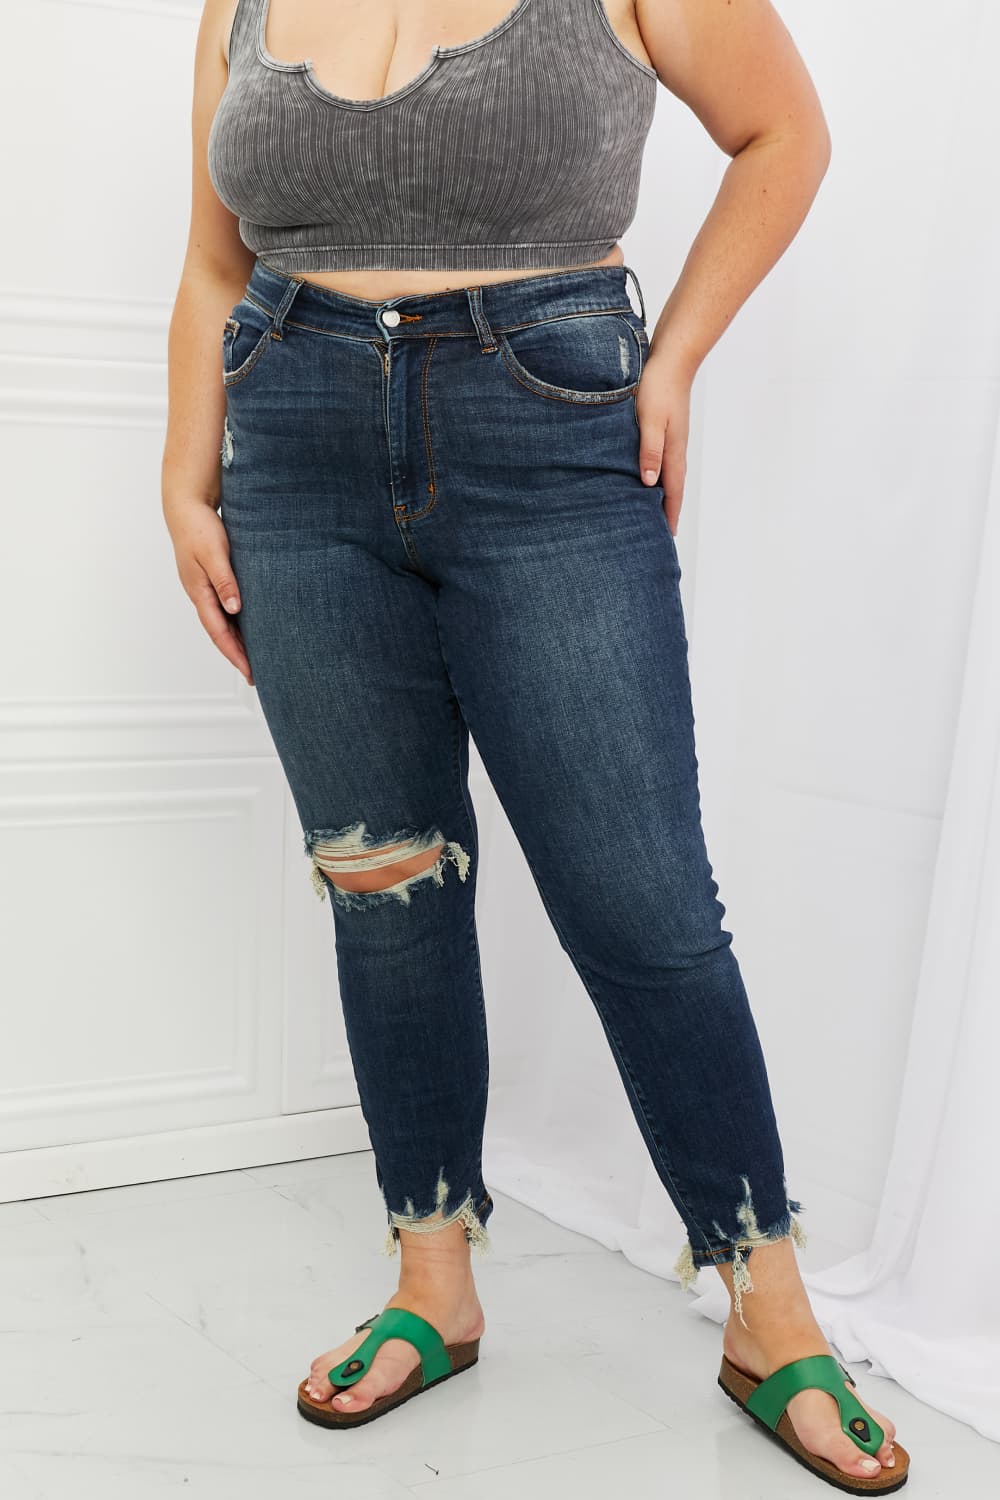 Plus Size, Judy Blue, Mid Rise Chopped Hem Relaxed Jeans Style 82446